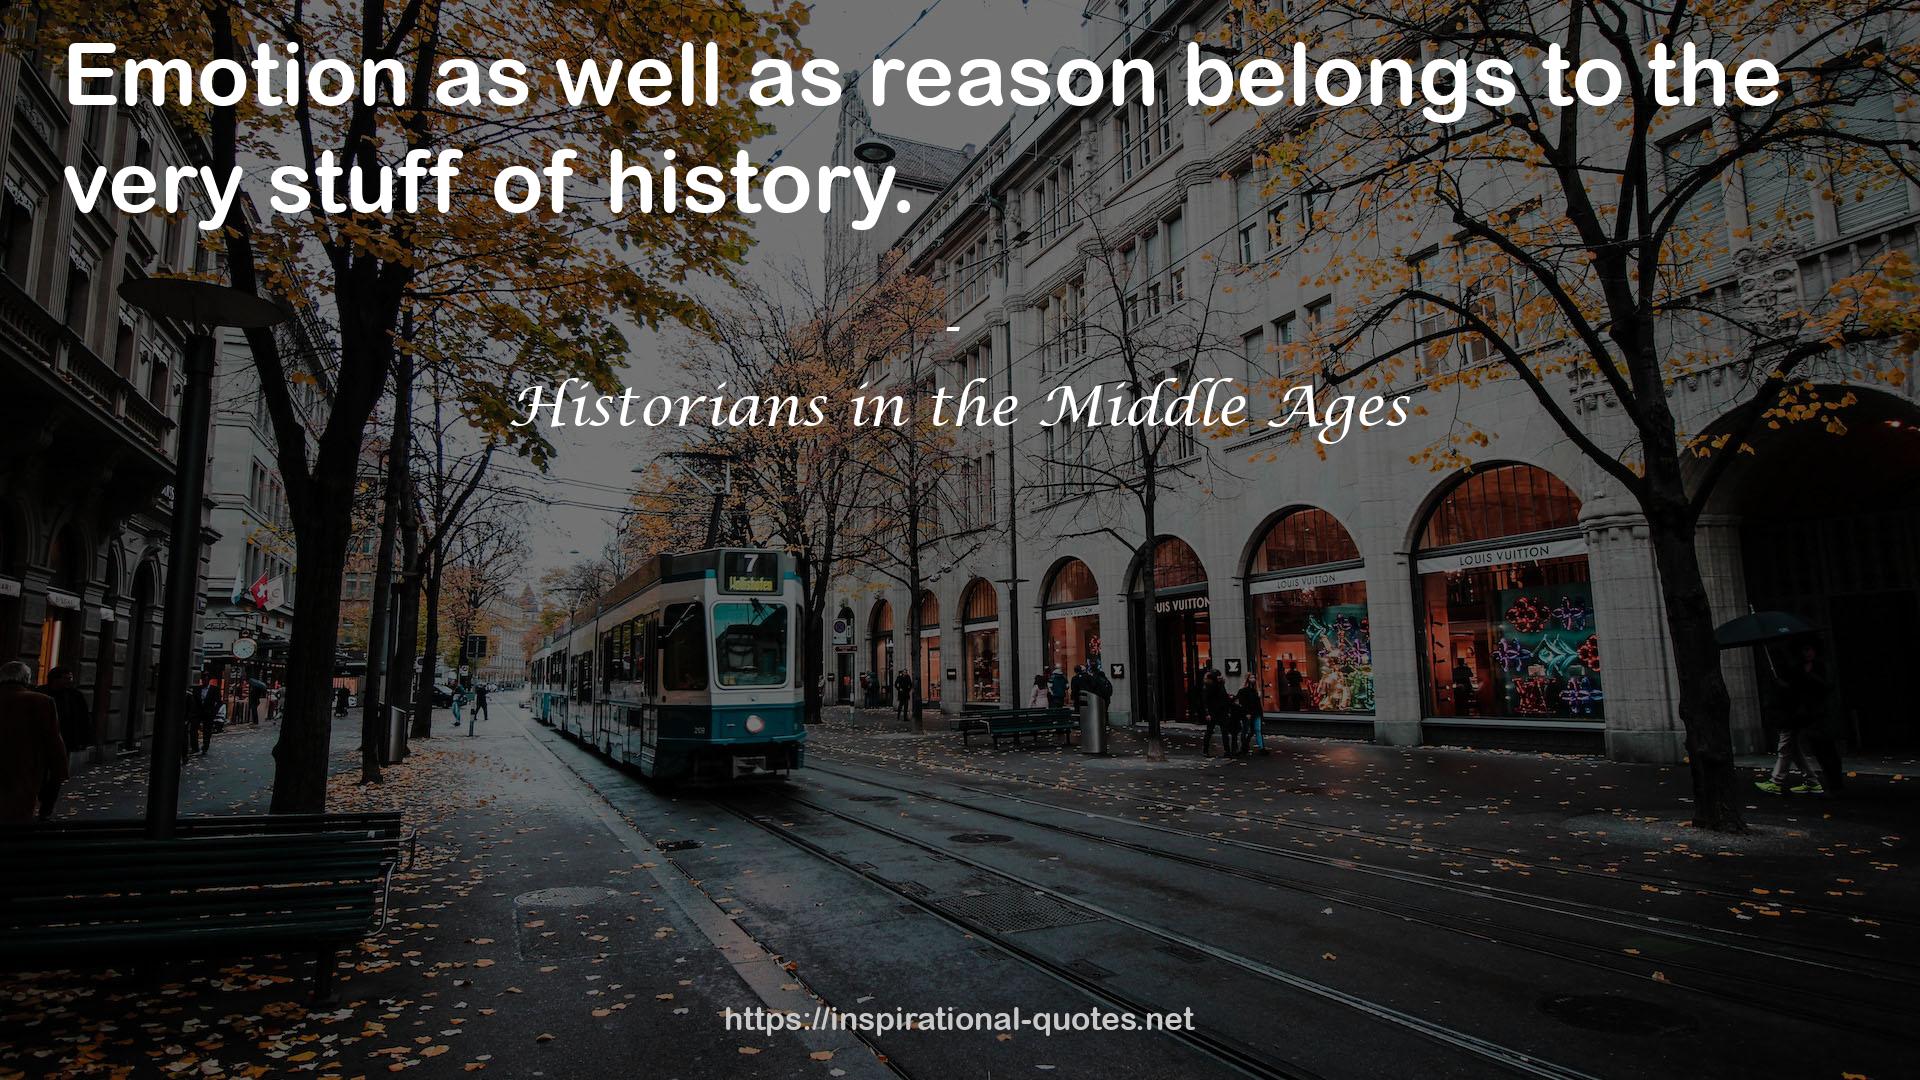 Historians in the Middle Ages QUOTES